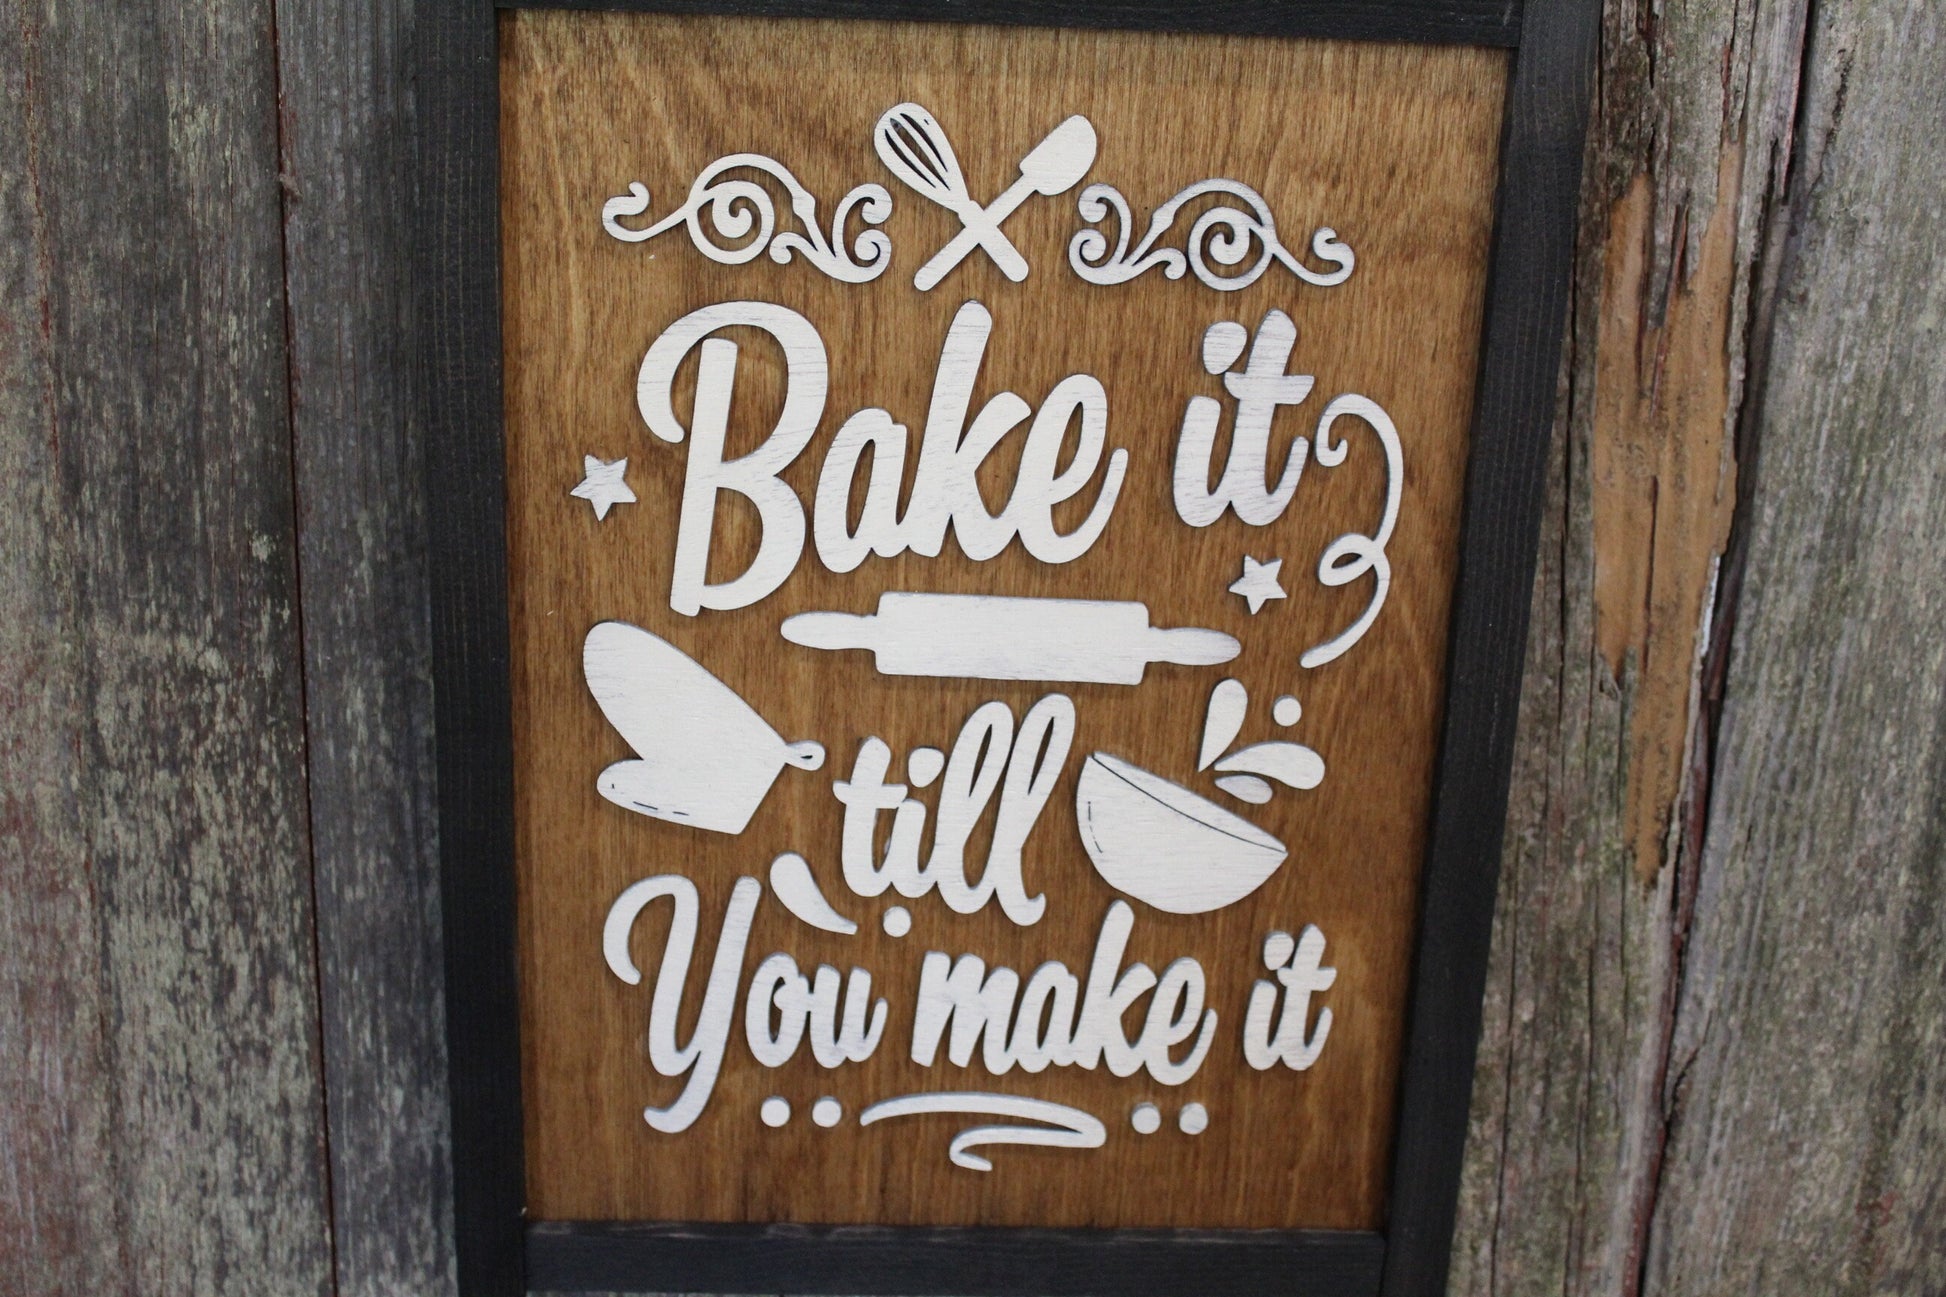 Bake It Till You Make It Kitchen Wall Sign 3D Raised Text Décor Decoration Art Bowl Mixer Framed Brown White Farmhouse Mitten Rolling Pin